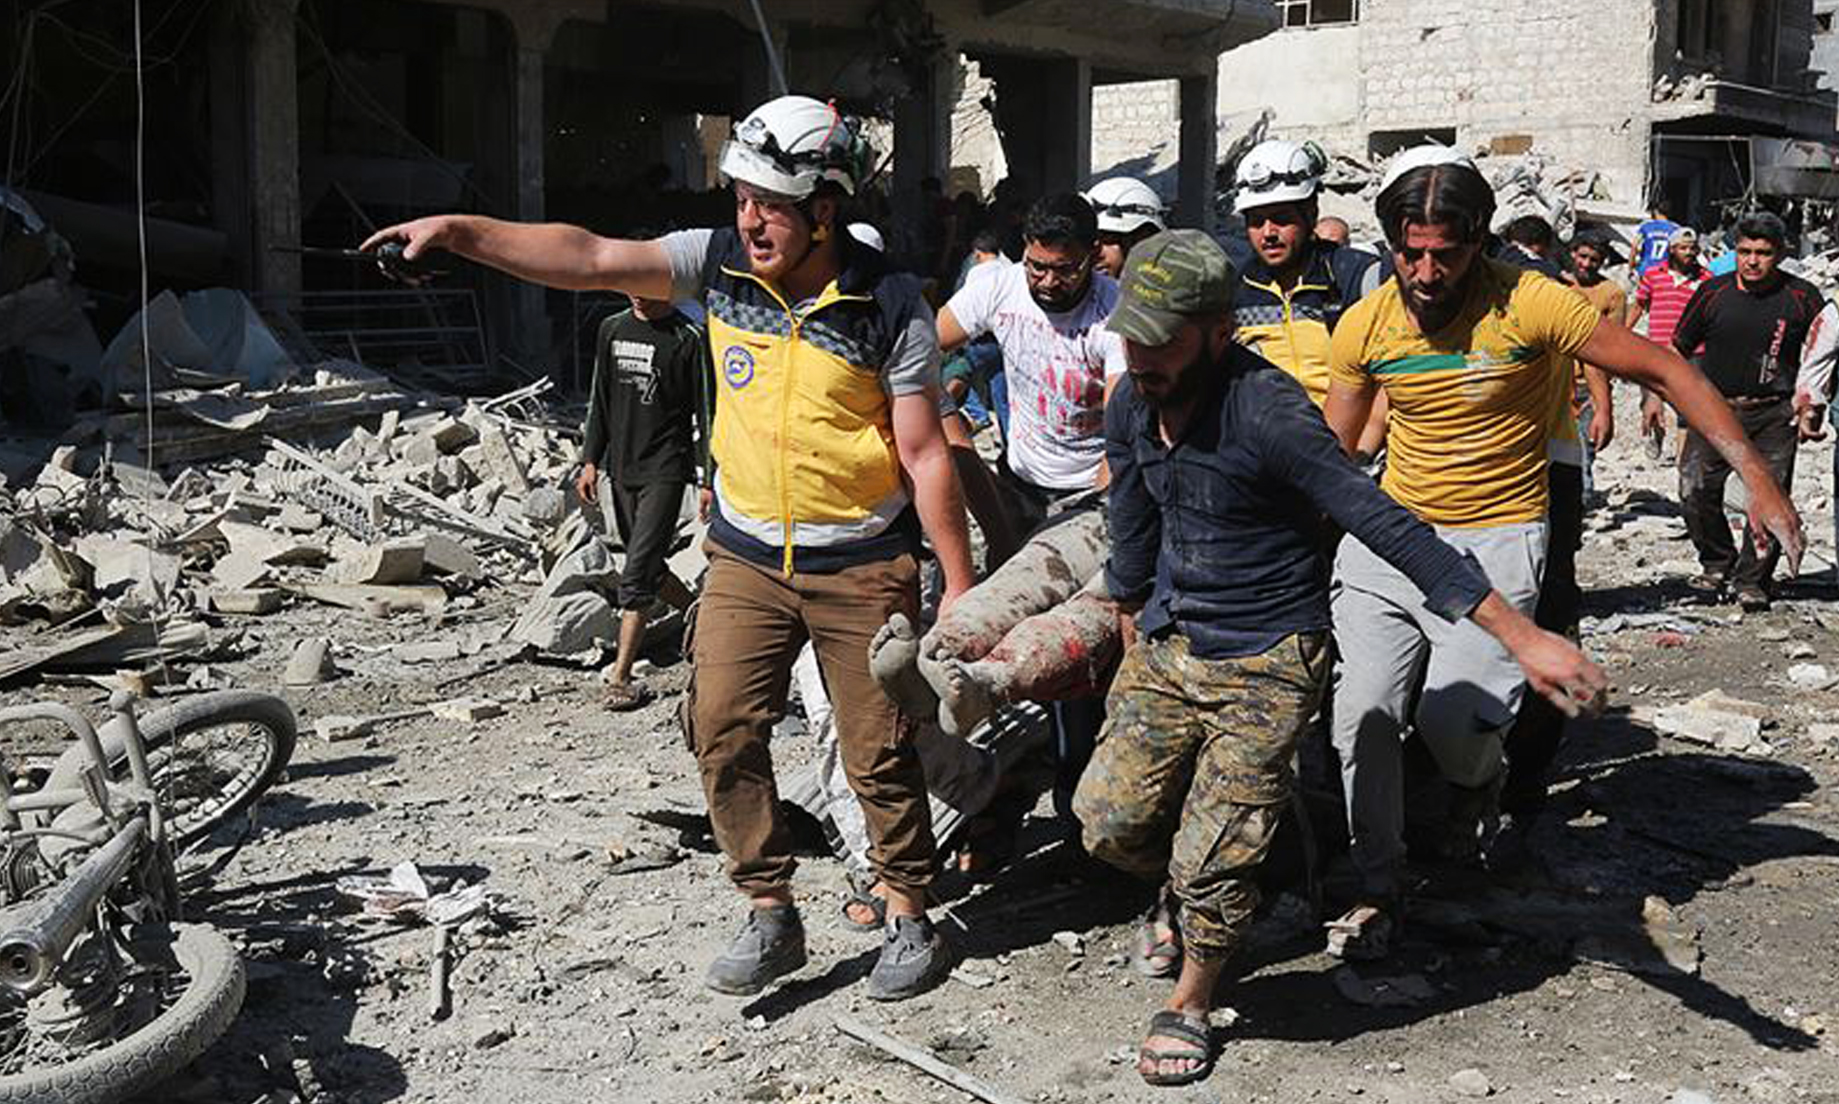 At least 43 killed in ‘largest massacre’ of latest Syria campaign